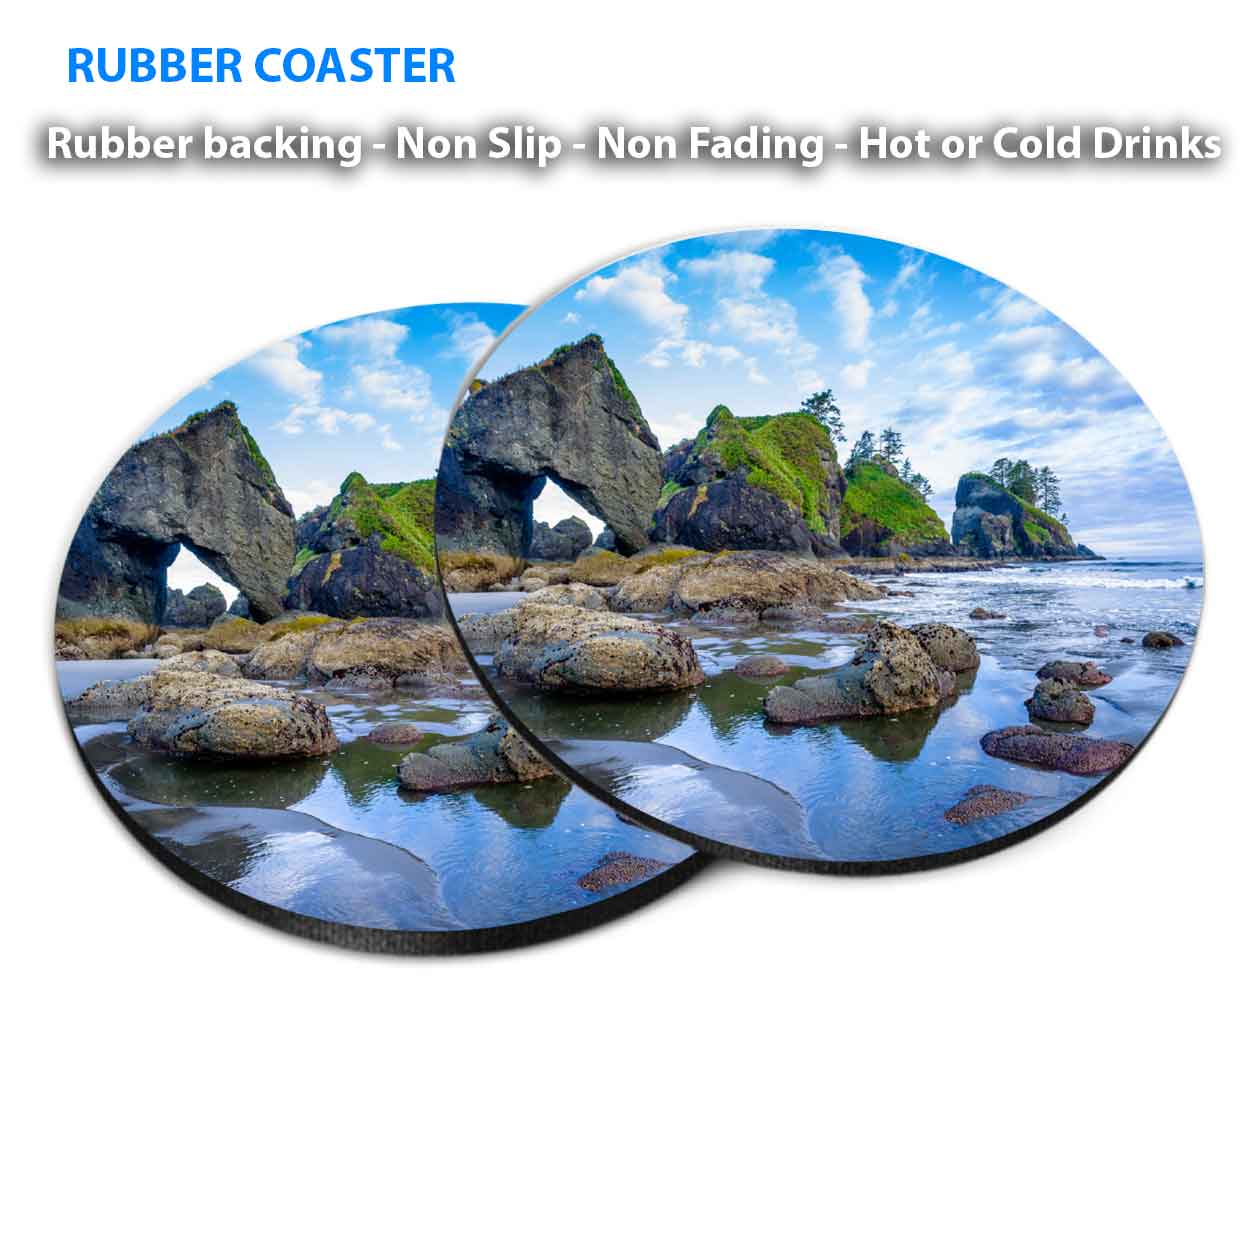 Rugged Beach With Rock Formation Coasters Wood & Rubber - Set of 6 Coasters